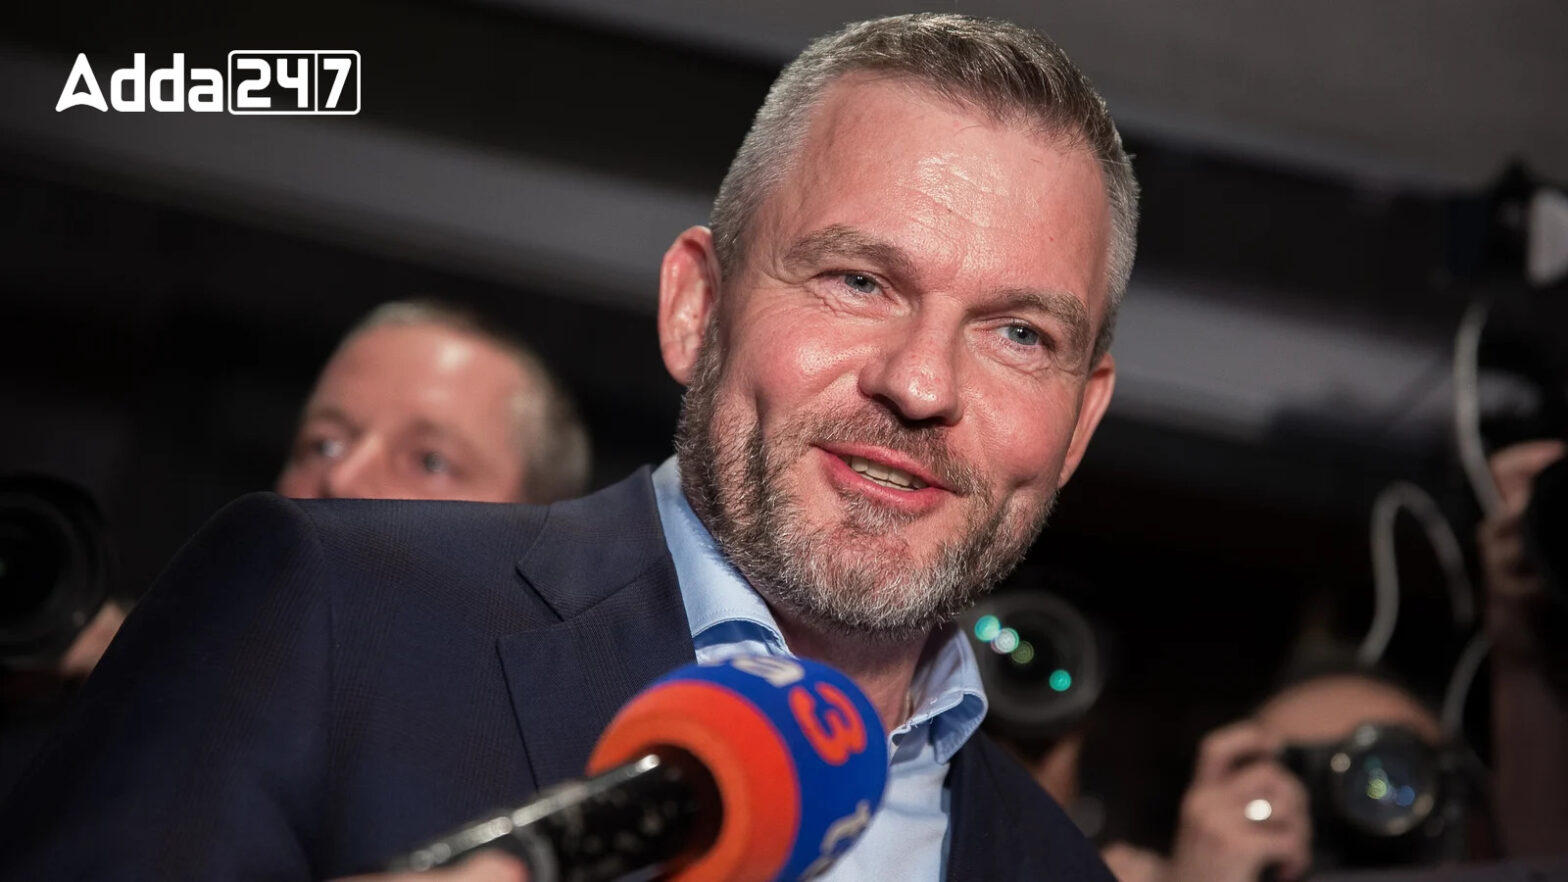 Peter Pellegrini Wins Slovakia Presidential Elections: Pro-Russia Stance Solidified